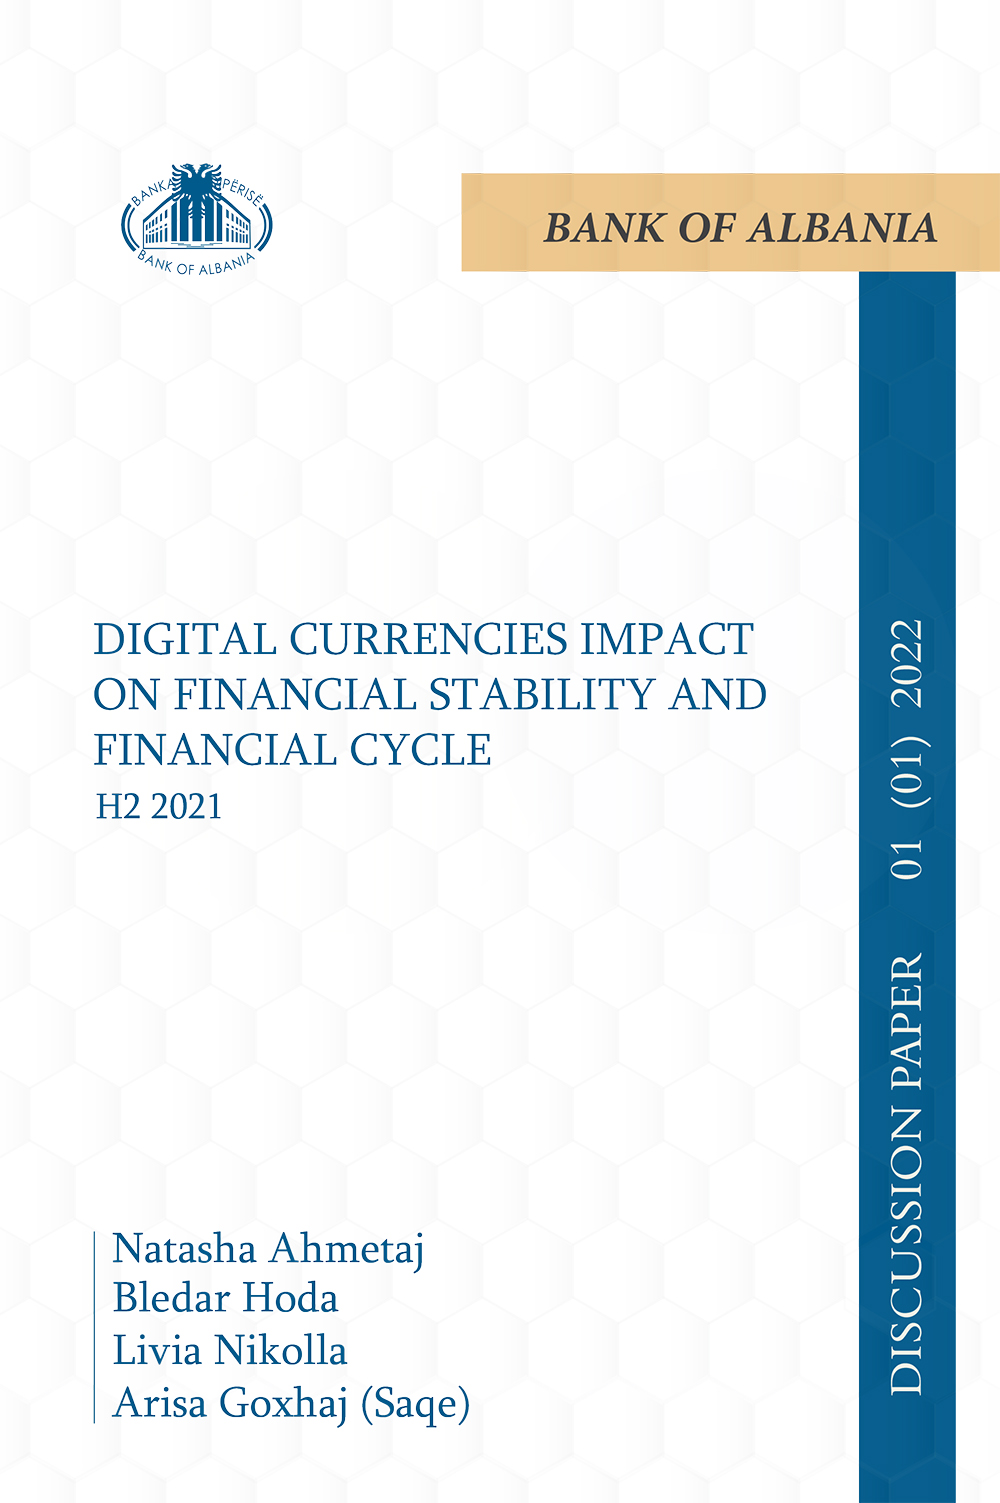 Digital currencies impact on financial stability and financial cycle, H2 2021